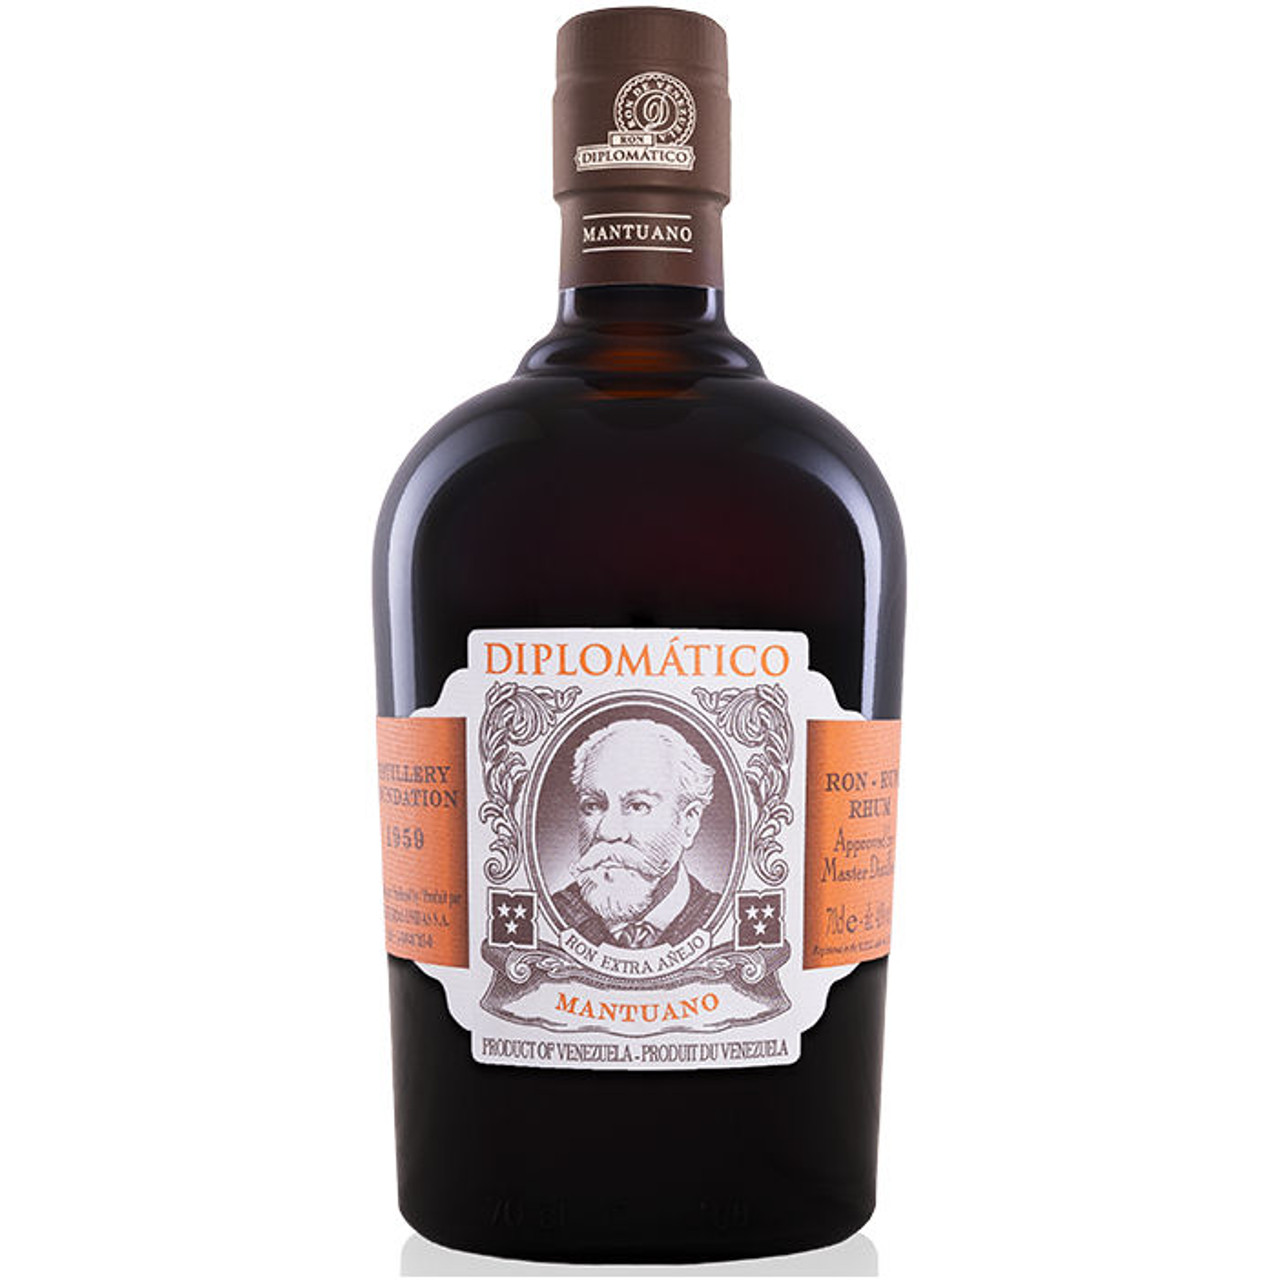 https://cdn11.bigcommerce.com/s-a04d0/images/stencil/1280x1280/products/8550/9017/diplomatico-mantuano-8-year-old-rum__24670.1661941402.jpg?c=2